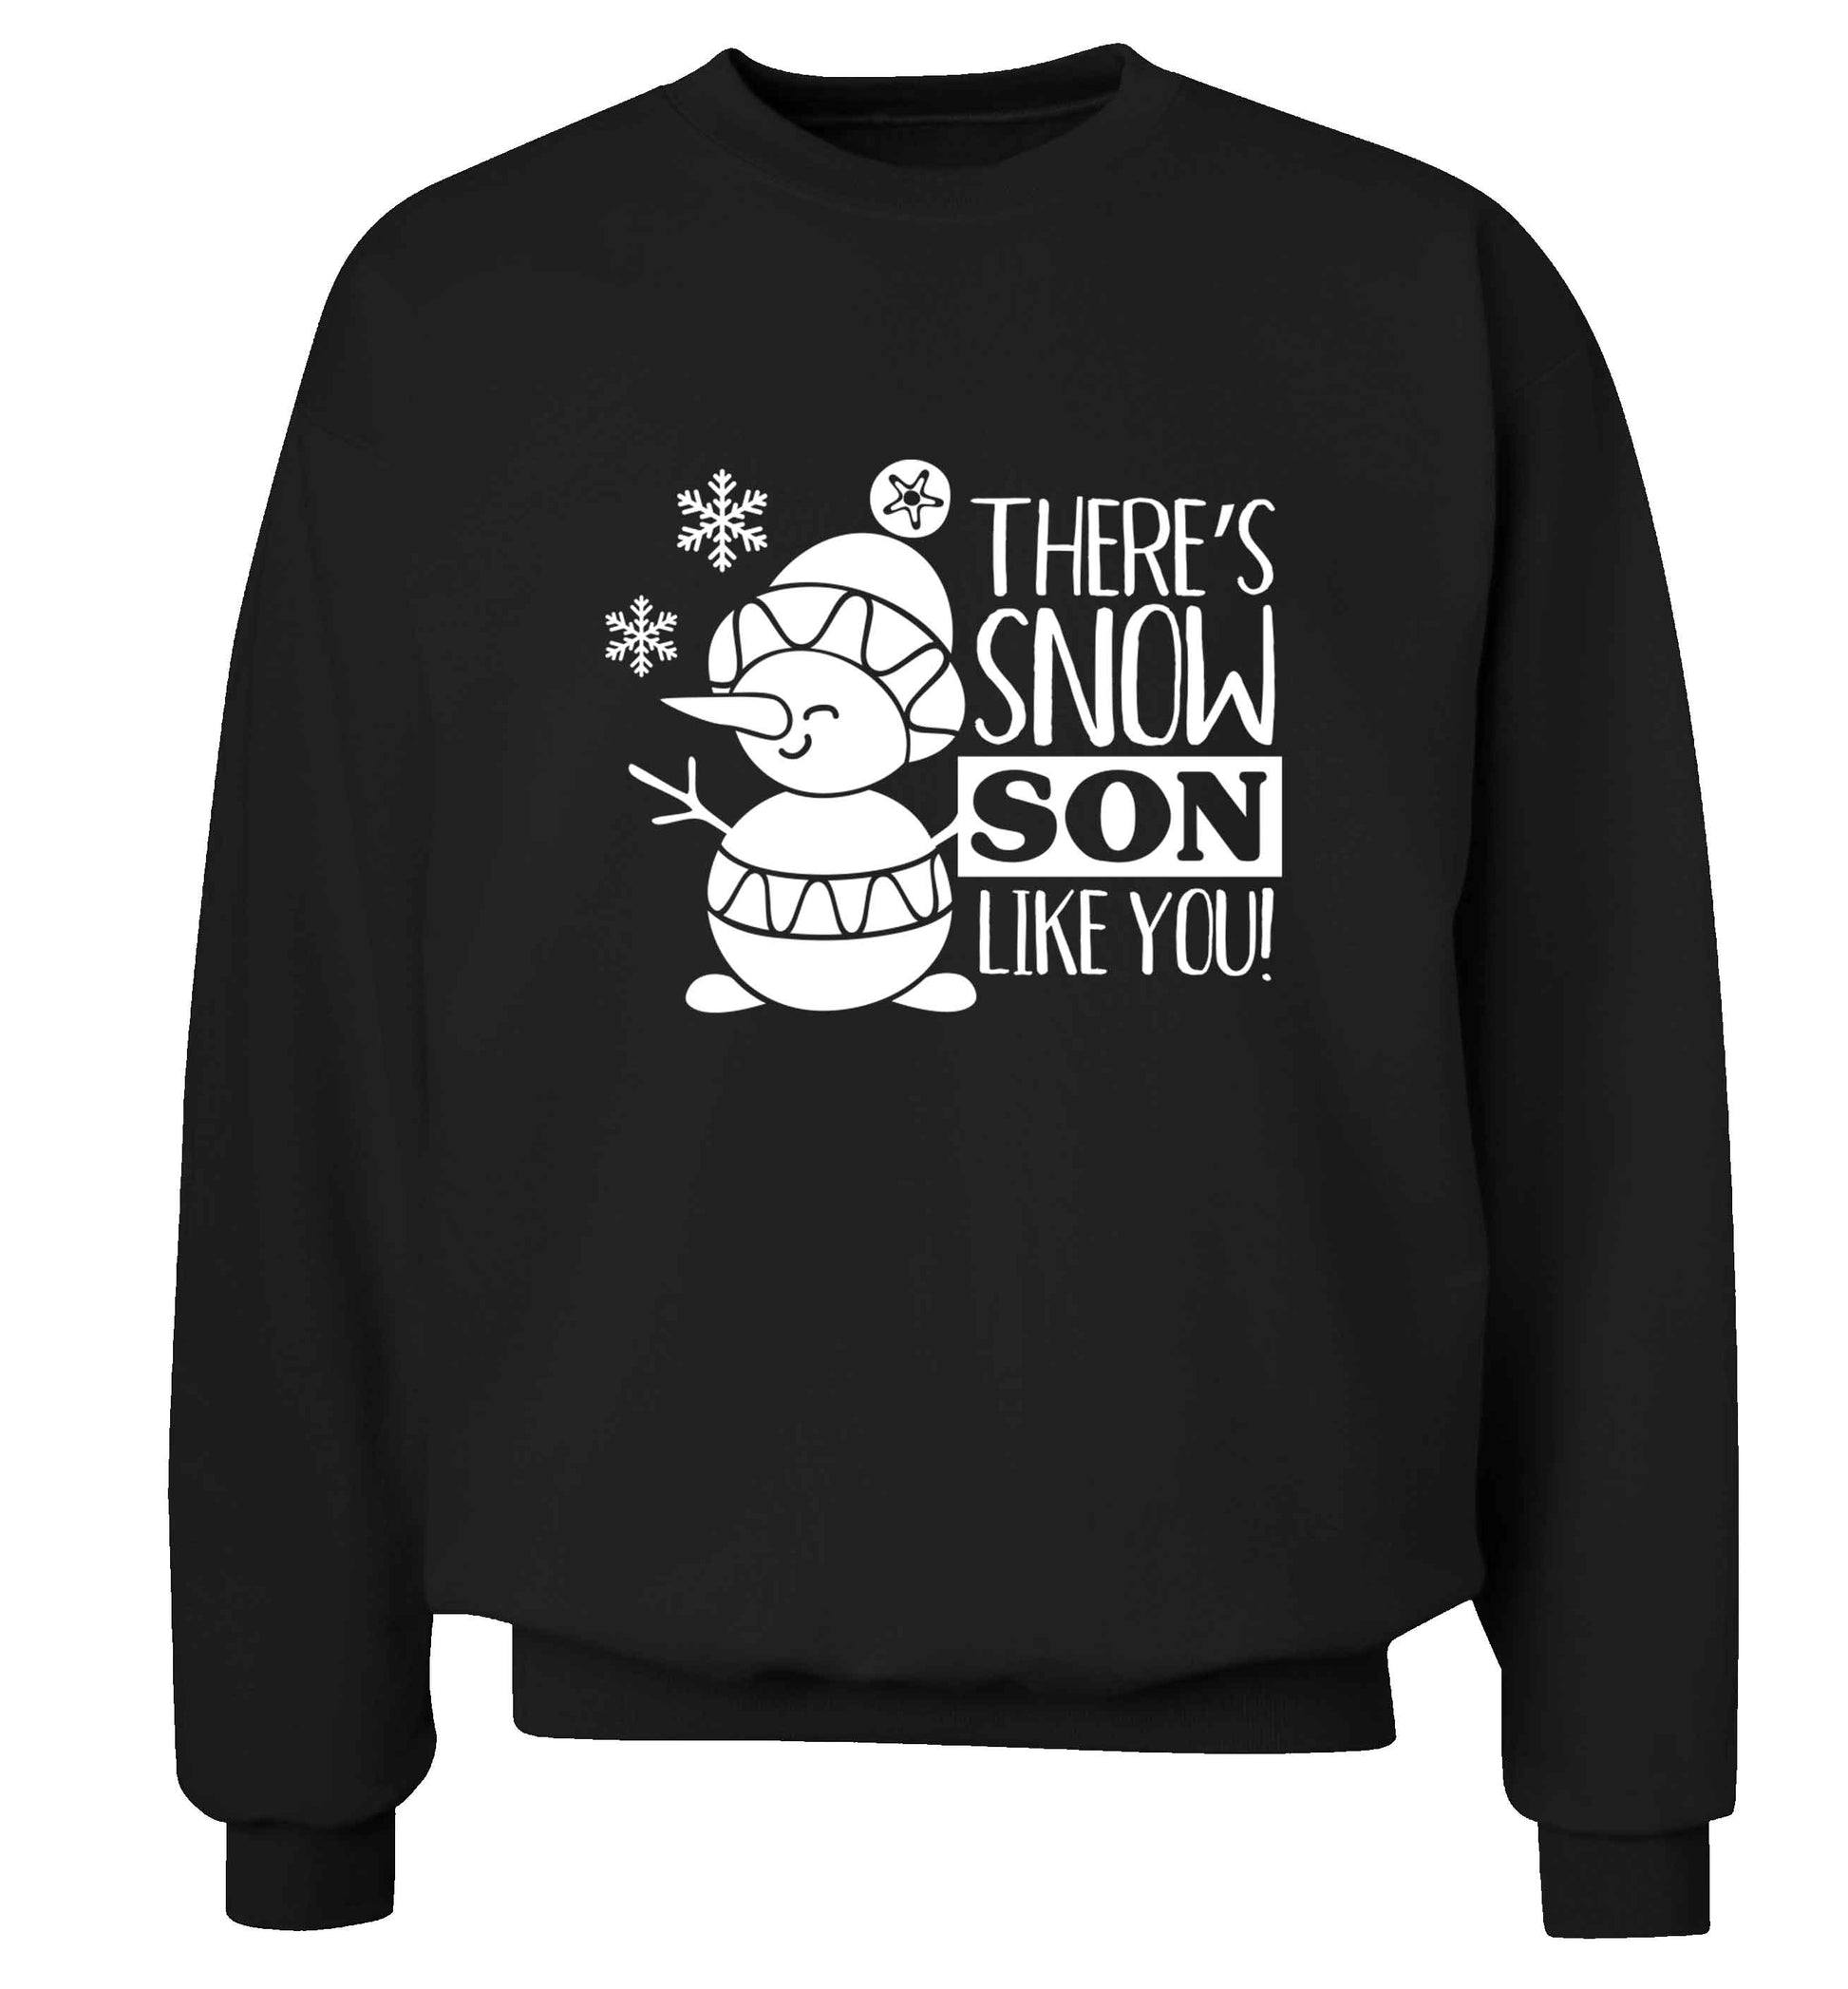 There's snow son like you adult's unisex black sweater 2XL